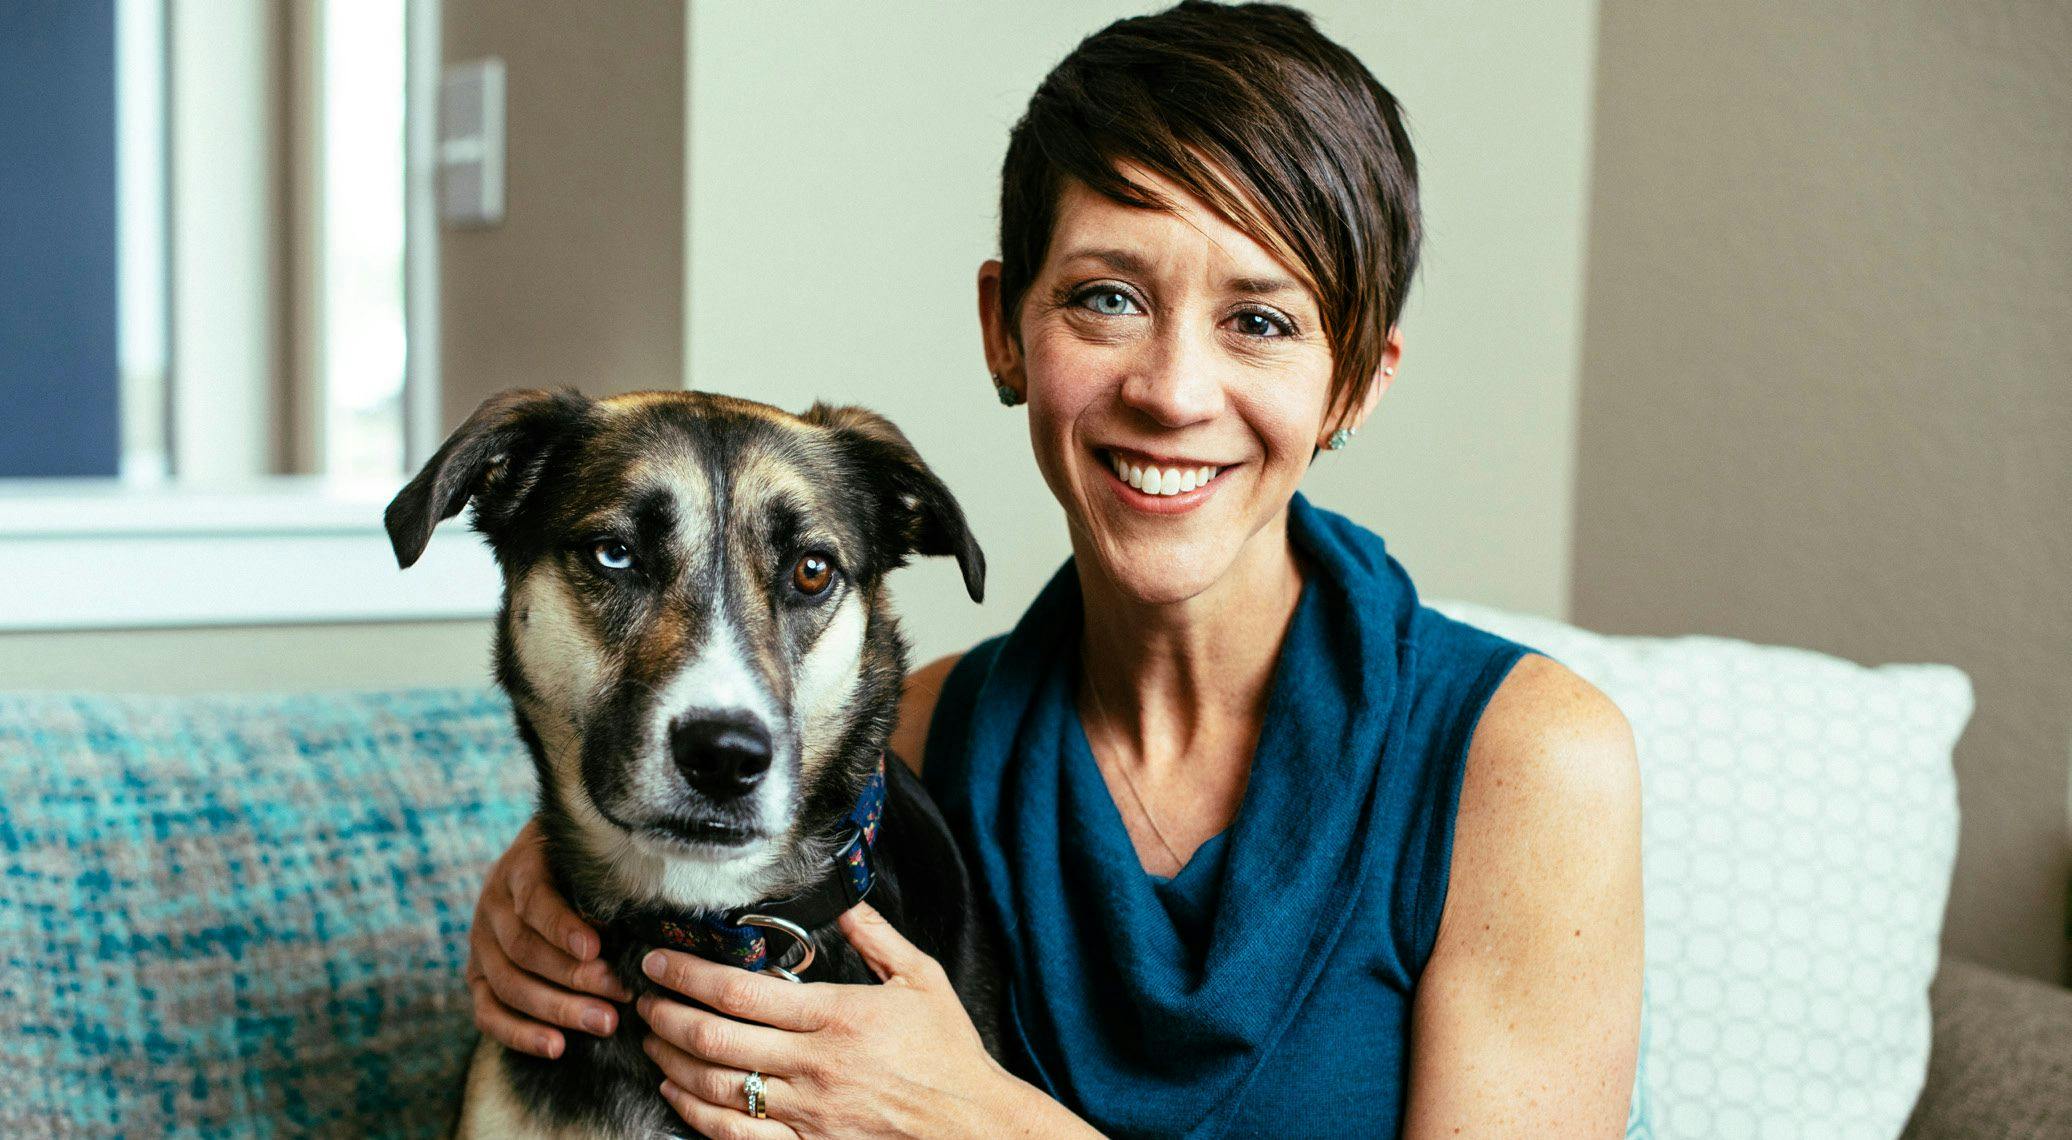 KATIE DOBLE and
her dog, ALICE, have
matching eyes. Doble's
dark brown eye color
changed to blue after
a series of procedures
related to her cancer. - PHOTO BY RYAN DEARTH